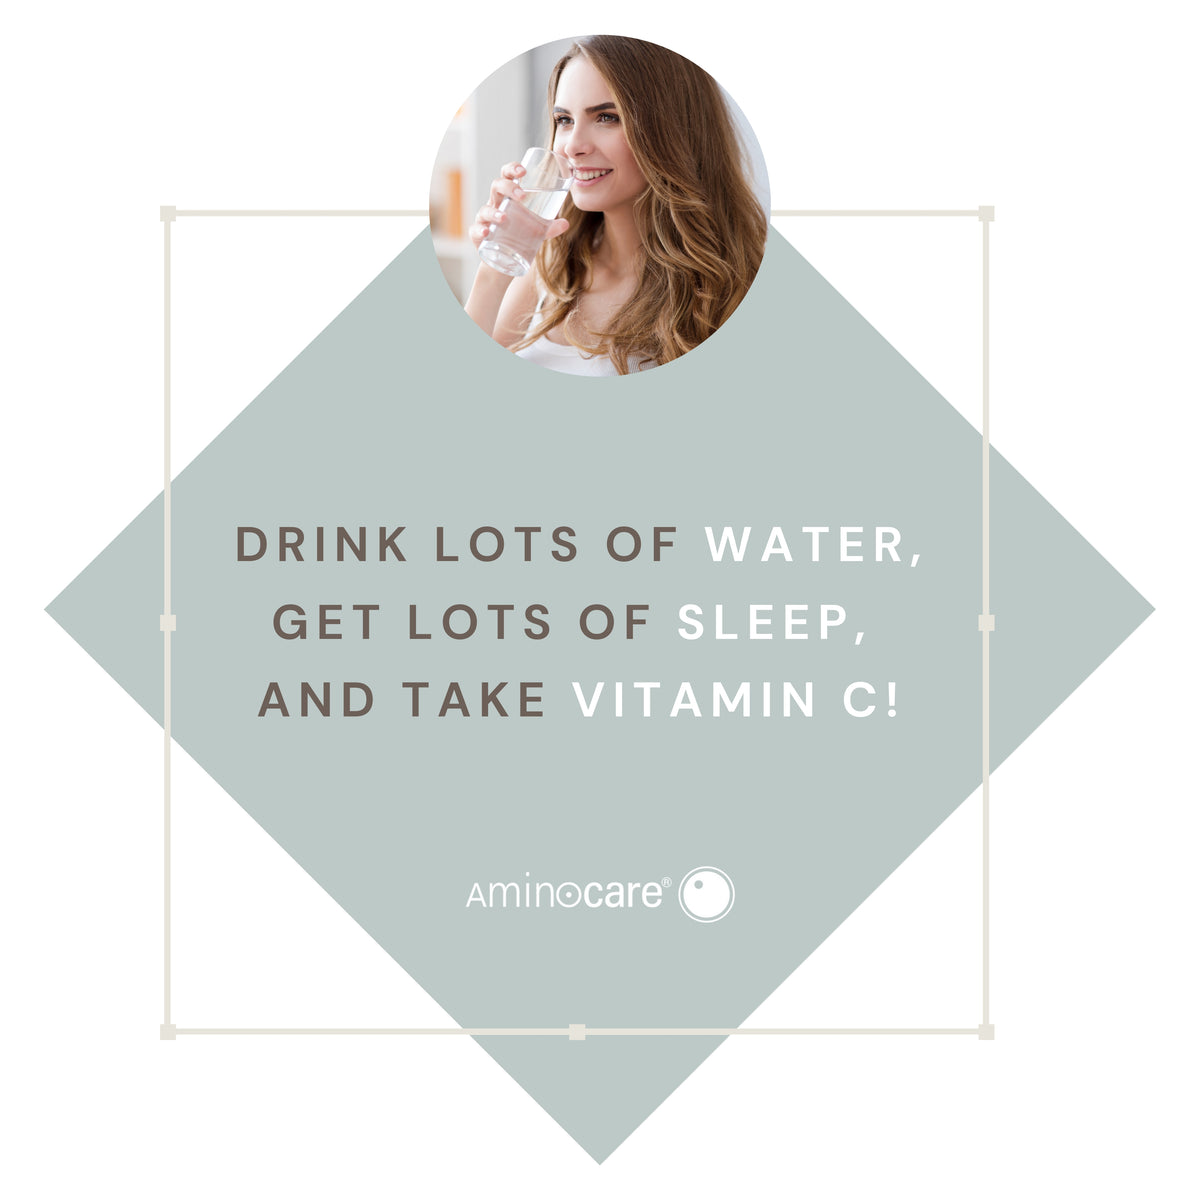 Drink lots of water, get lots of sleep, and take vitamin C for better health!